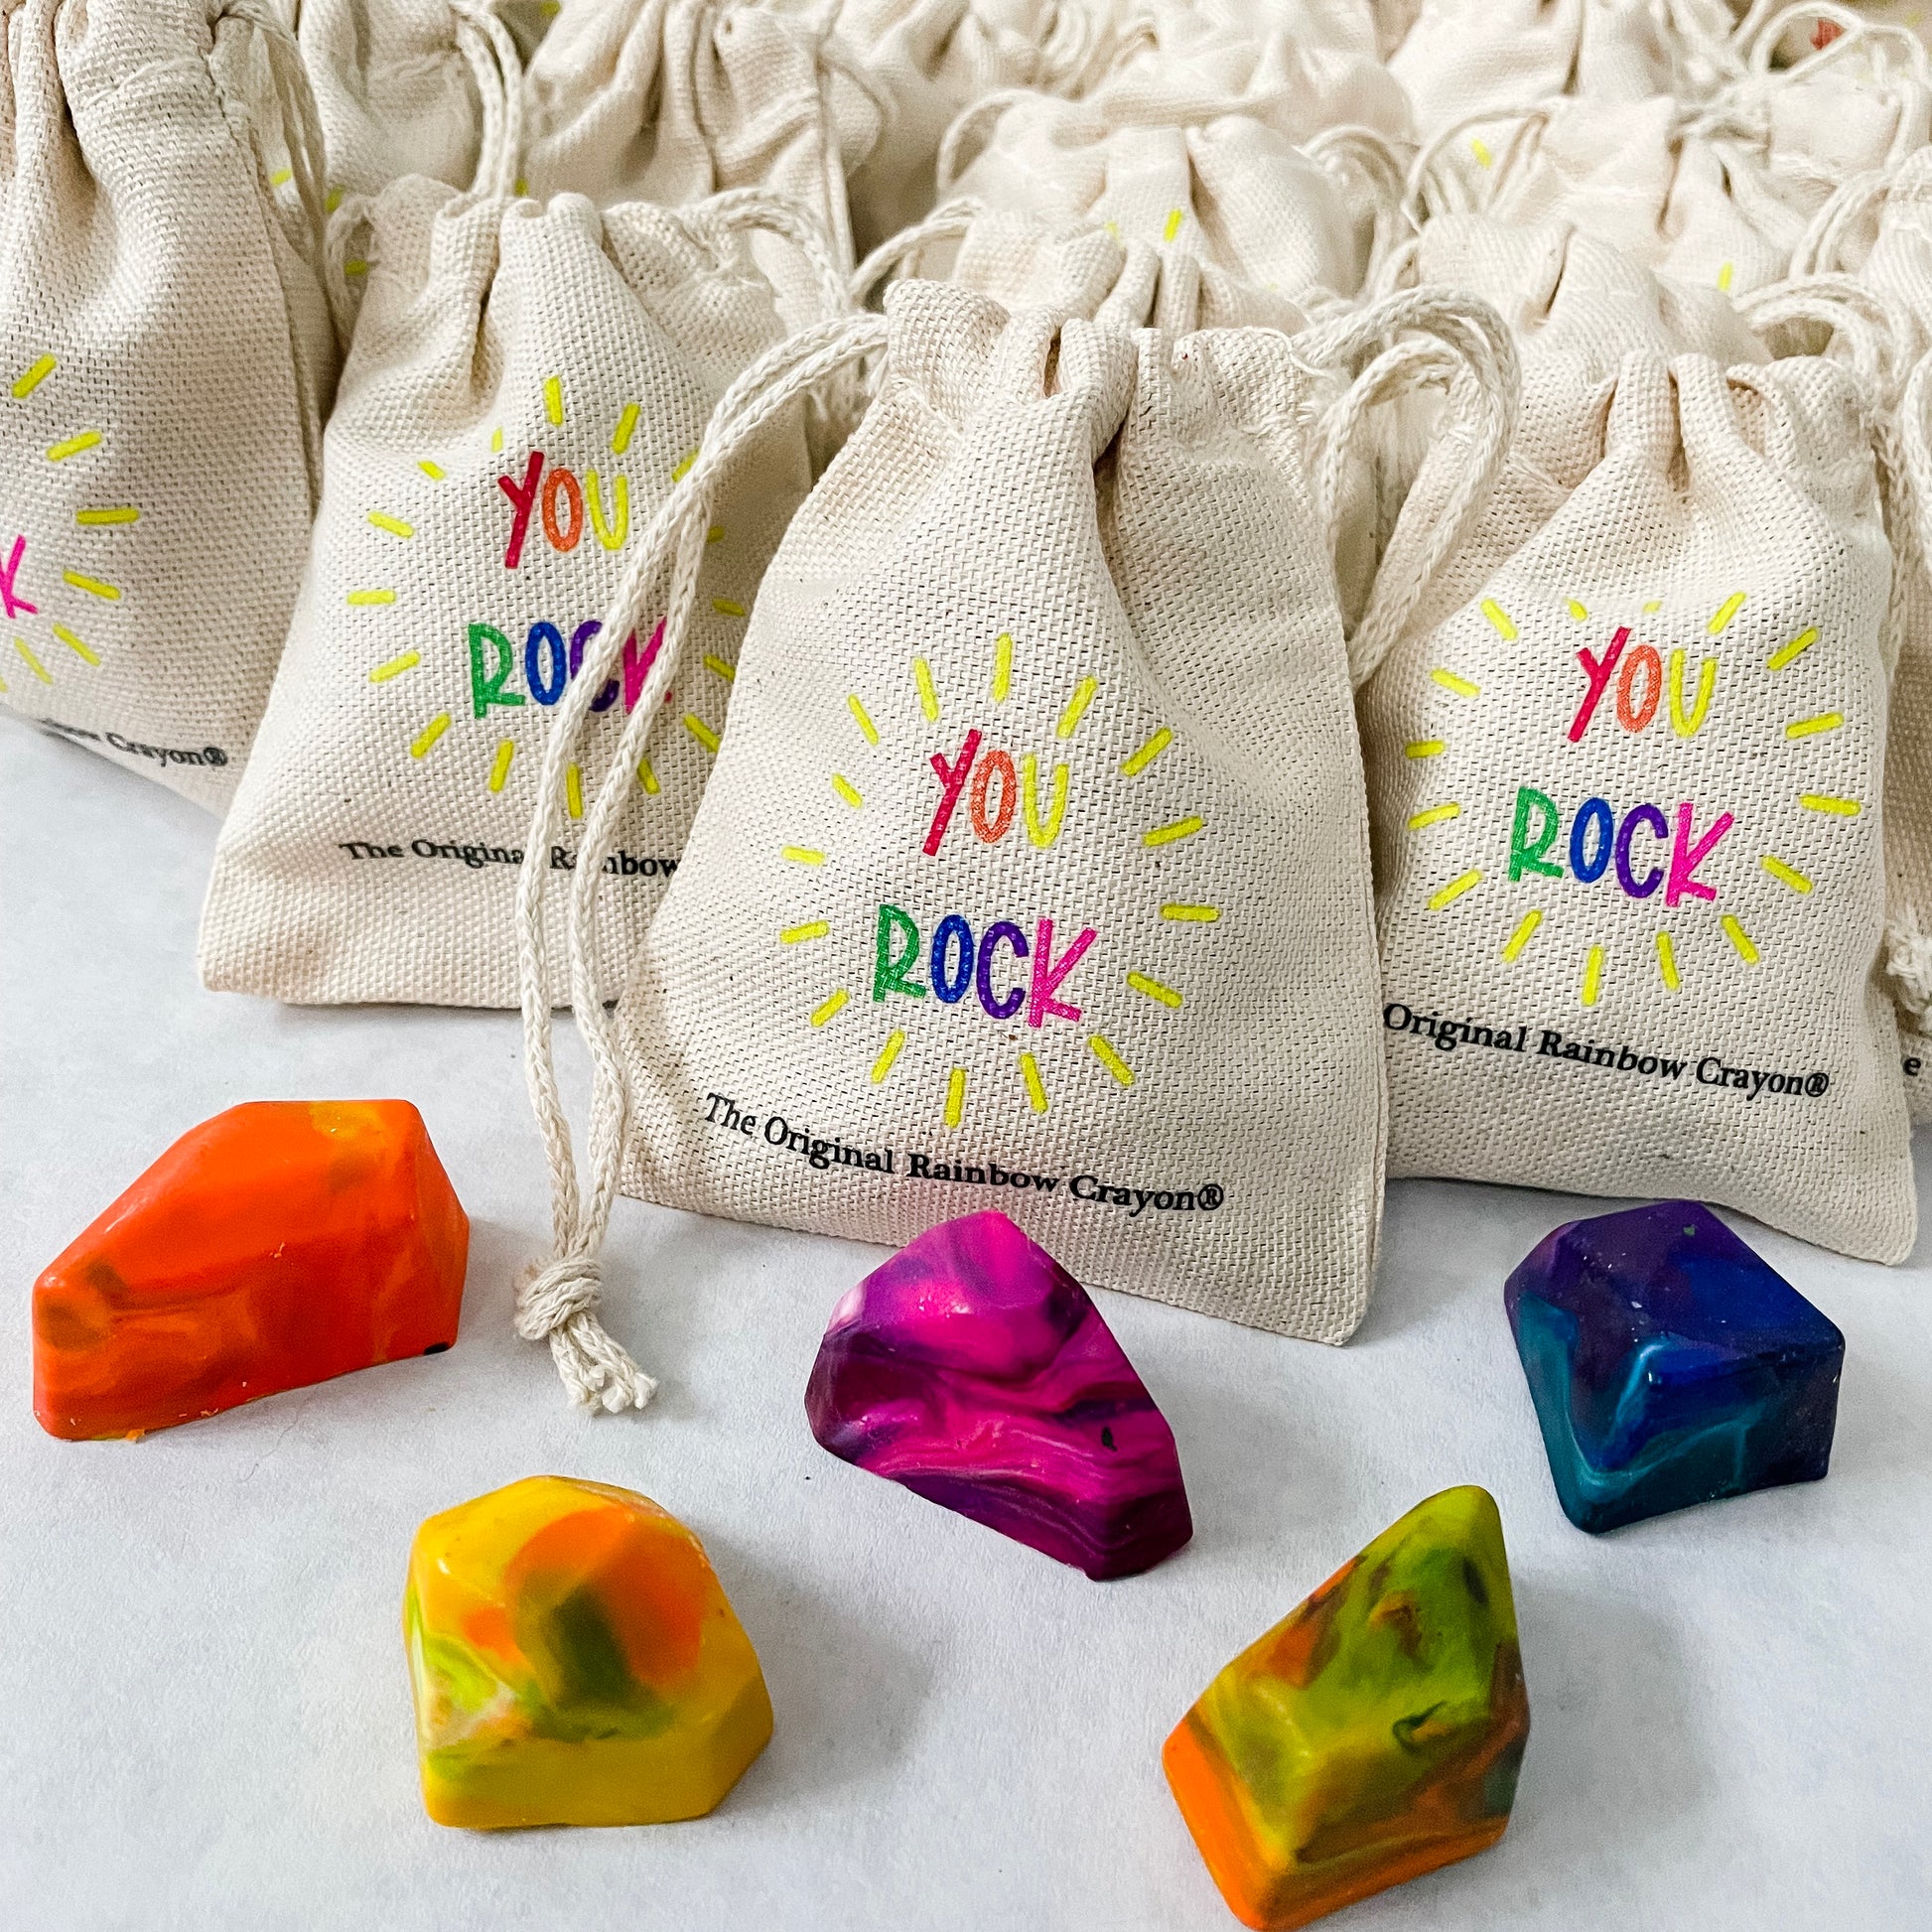 Several mini, beige drawstring bags with the text YOU ROCK is shown on a white paper. One bag is more in focus with 5 multicolored crayon rocks on top of the paper. The Original Rainbow Crayon logo is also shown in smaller, black letters below the rainbow YOU ROCK saying. 